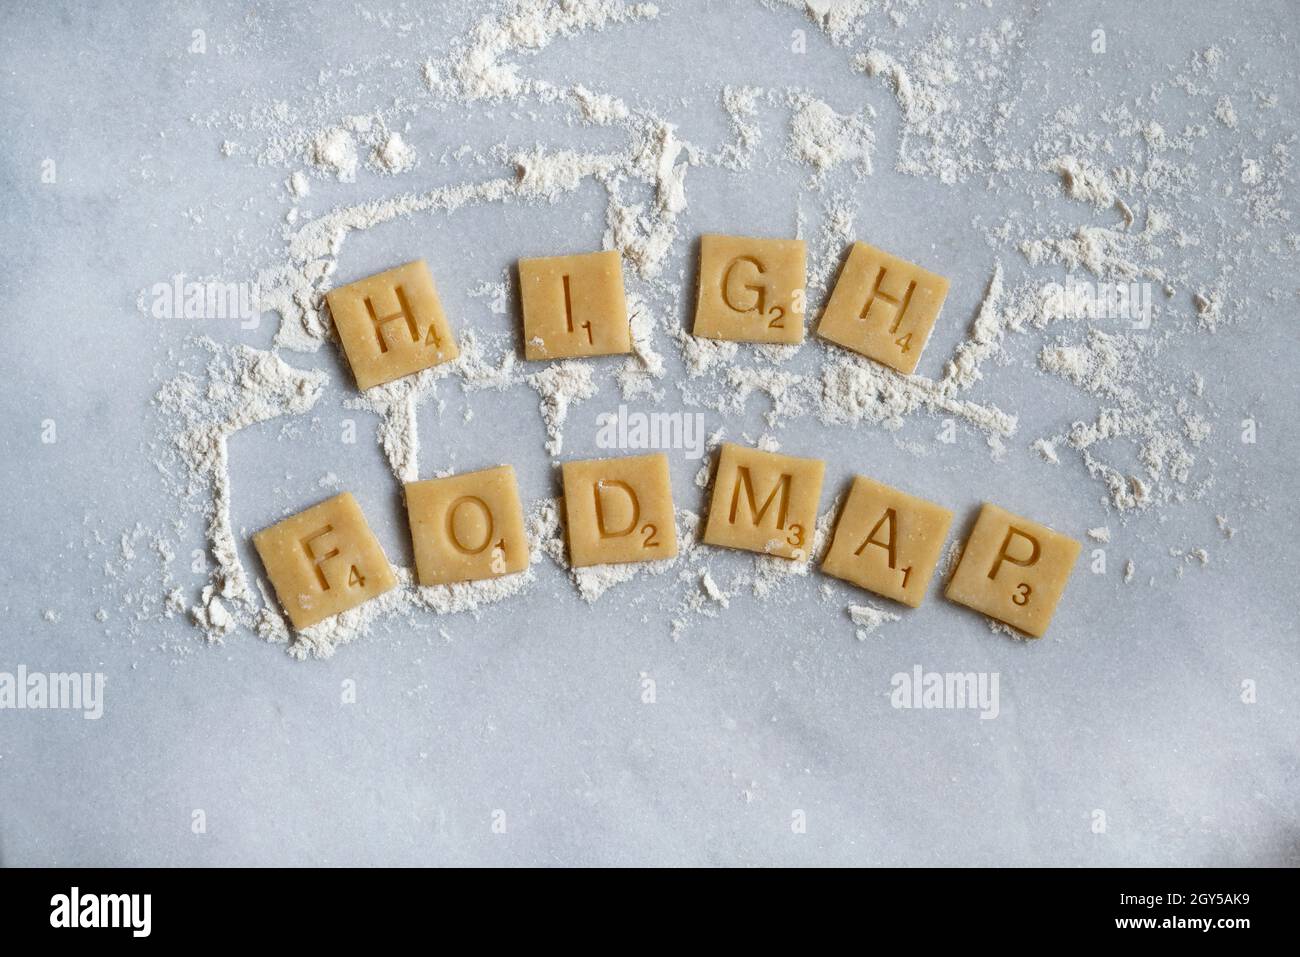 Wheat pastry squares spelling out 'High Fodmap'. Stock Photo